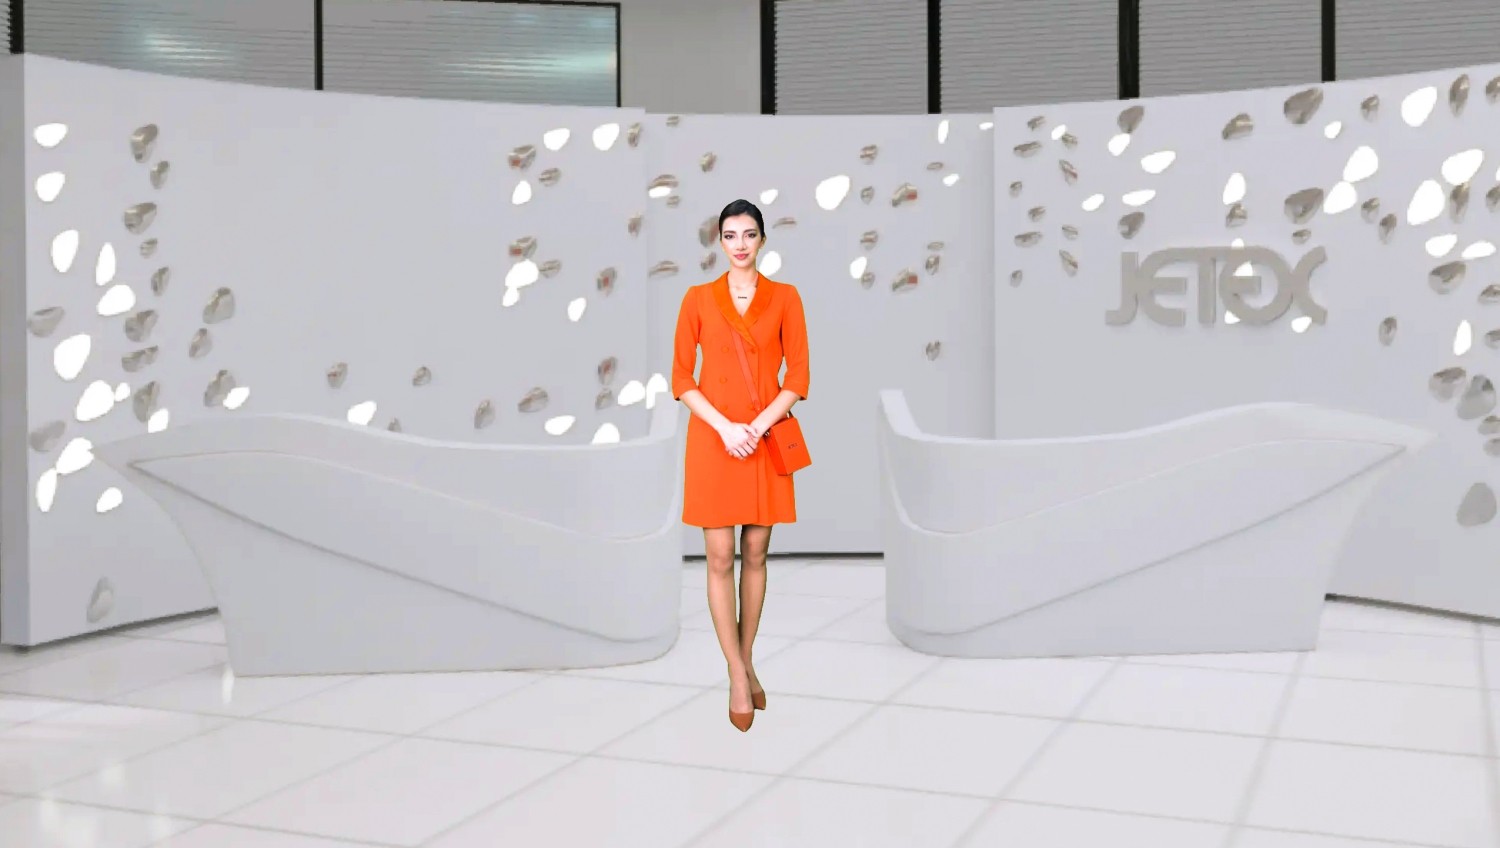 Jetex Enters Metaverse with The World’s First Metafbo Private Terminal